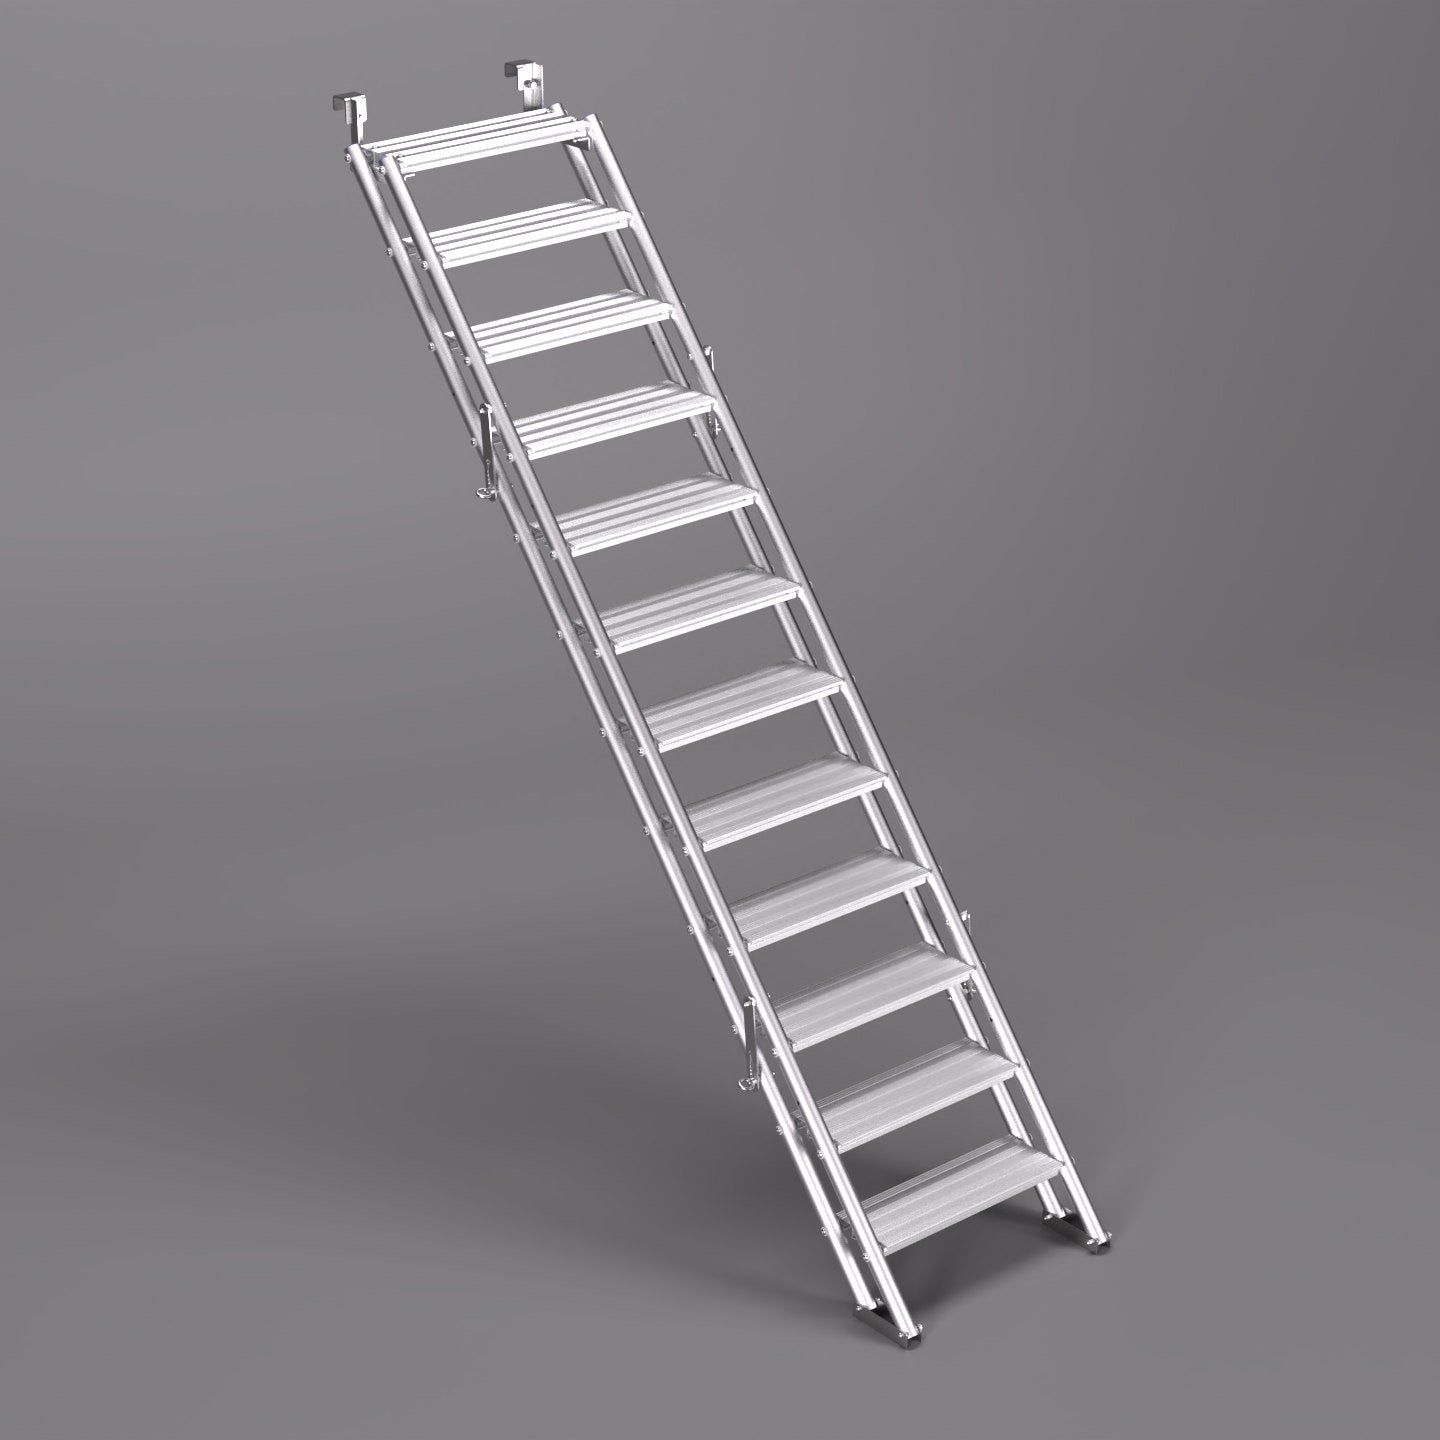 An image of a 2.5m ALTO Universal Stair Unit with the scaffold tube hook option.